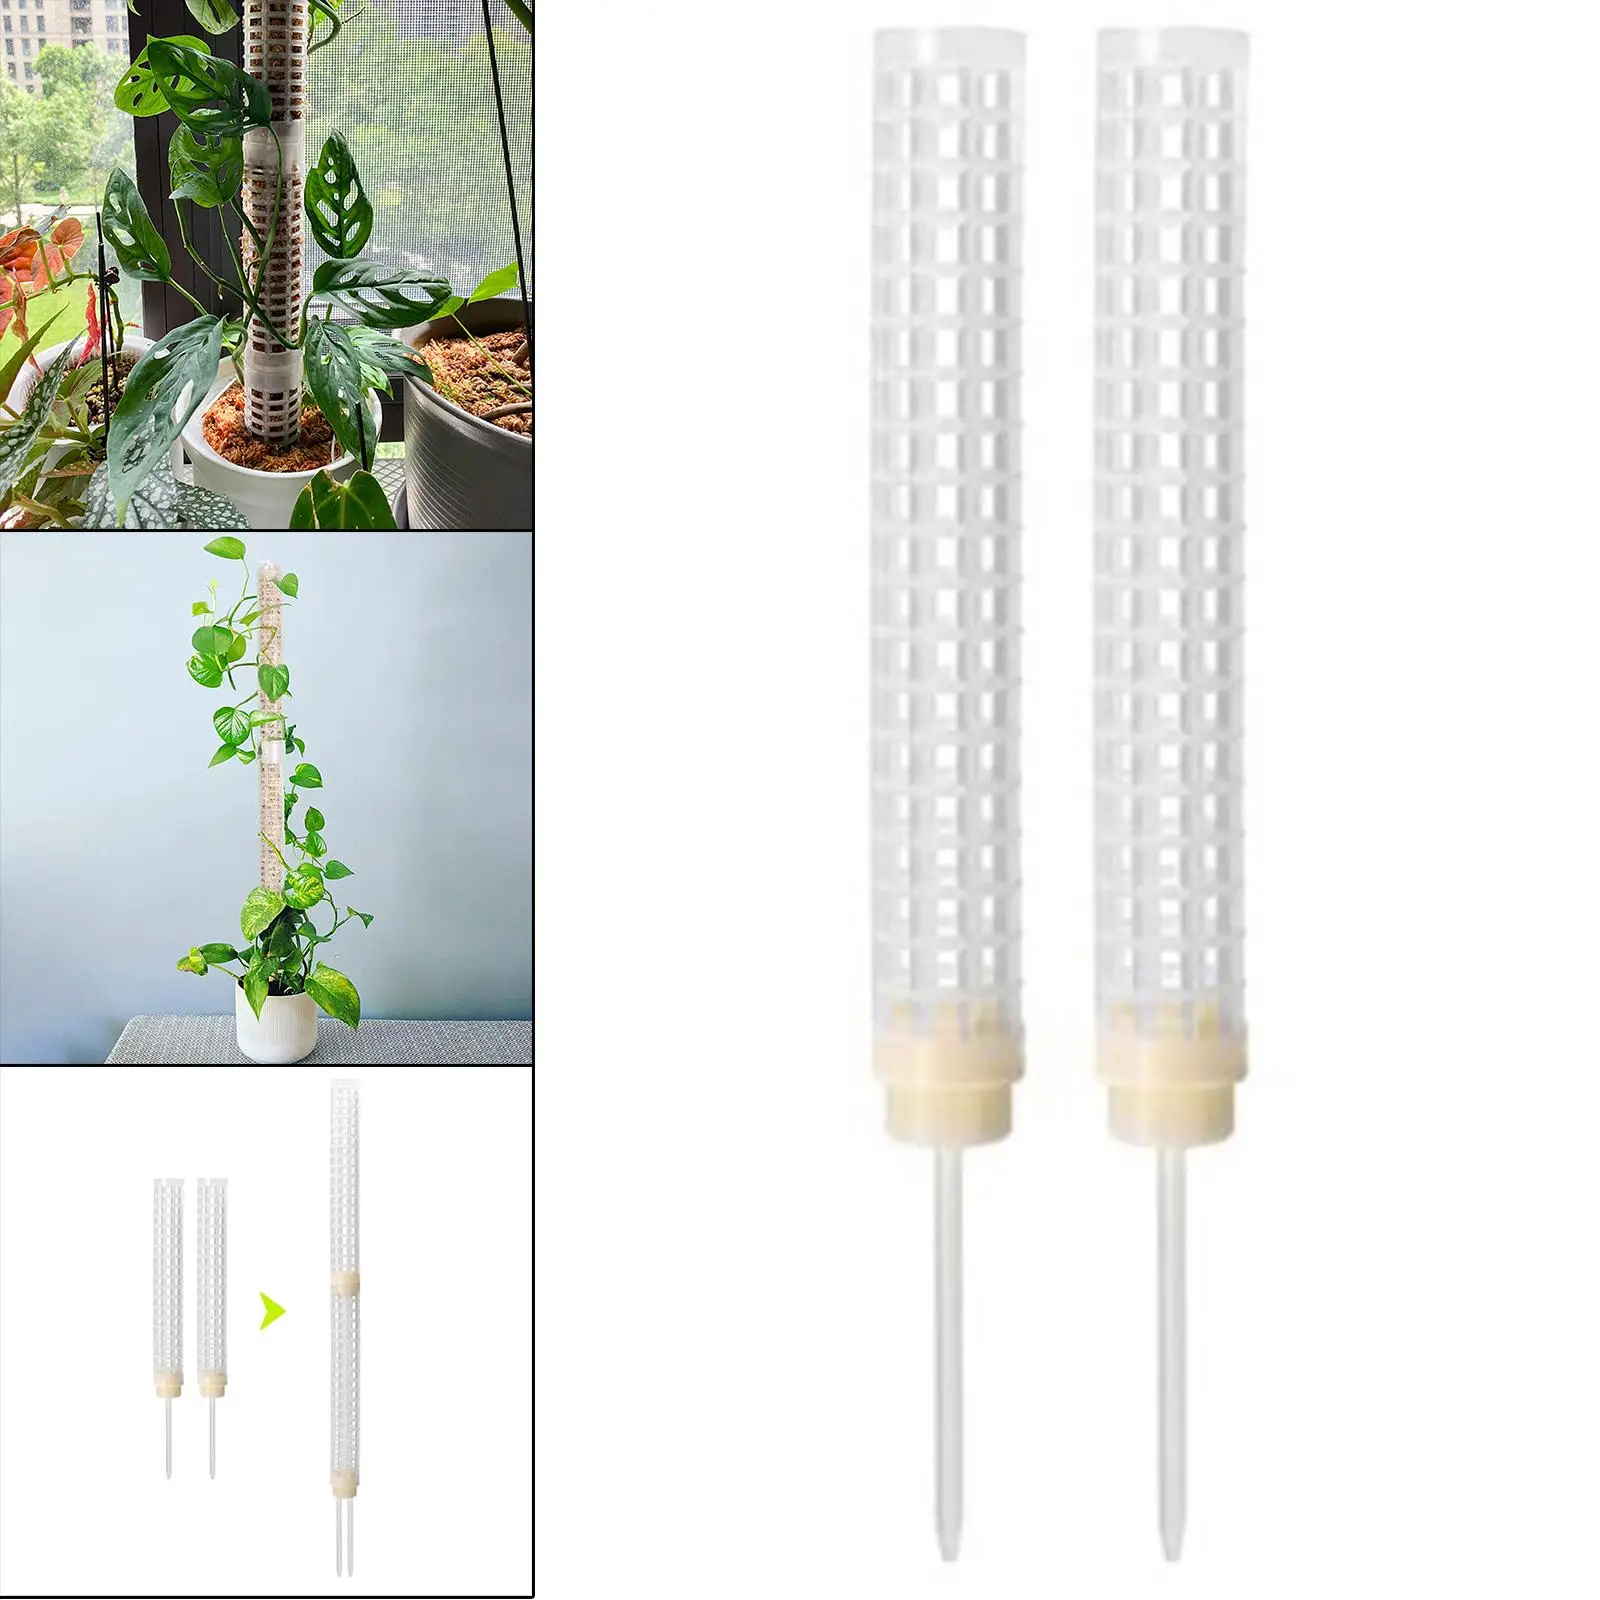 Climbing Plant Translucent Creepers Moss Pole Indoor for Monstera Potted Flowers Spagnum Coconut Palm